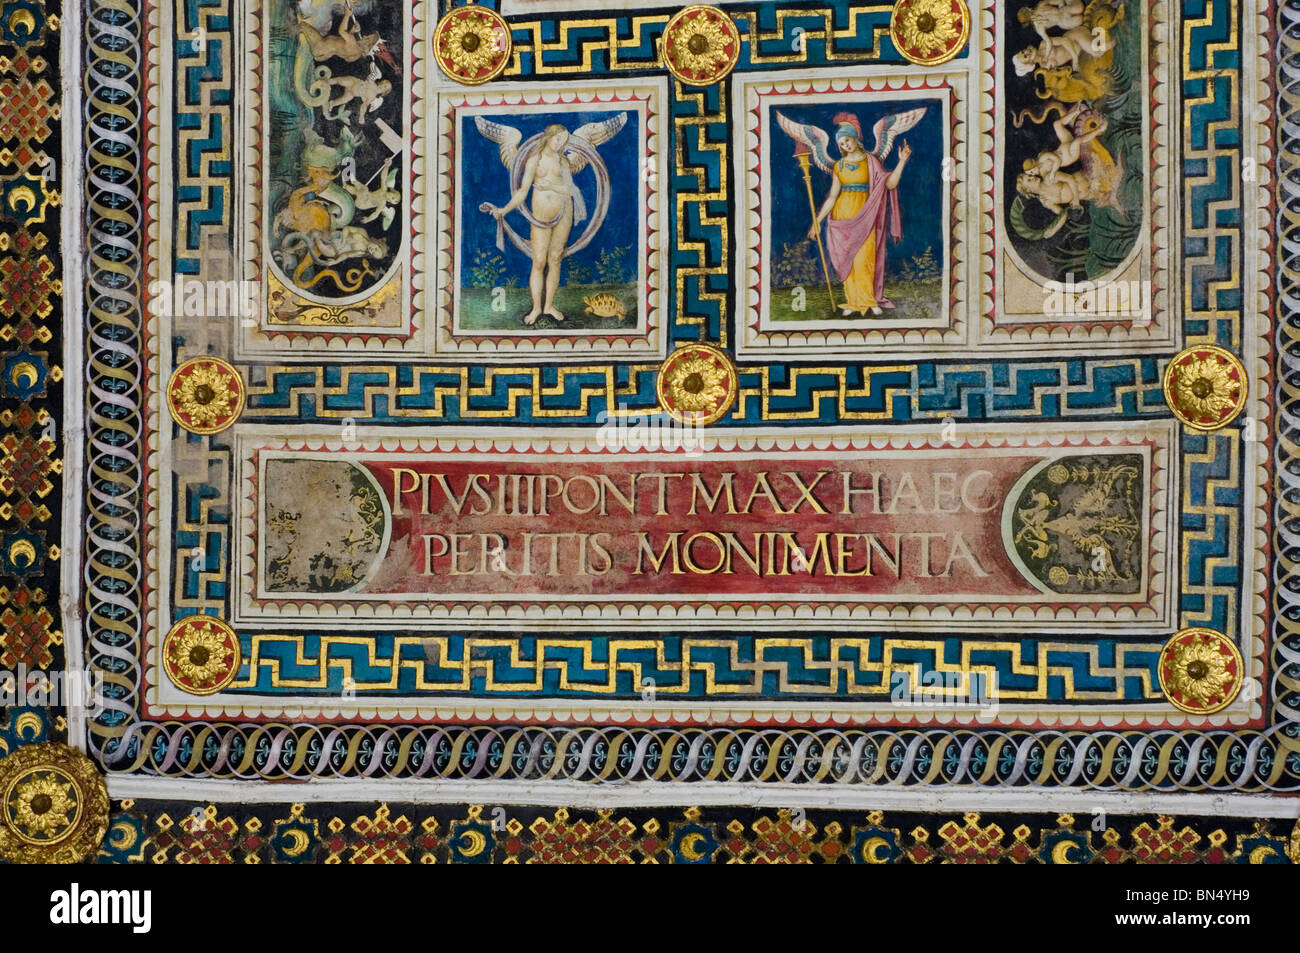 Ceiling of the Libreria Piccolomini within the Duomo or cathedral in Siena, Tuscany Stock Photo